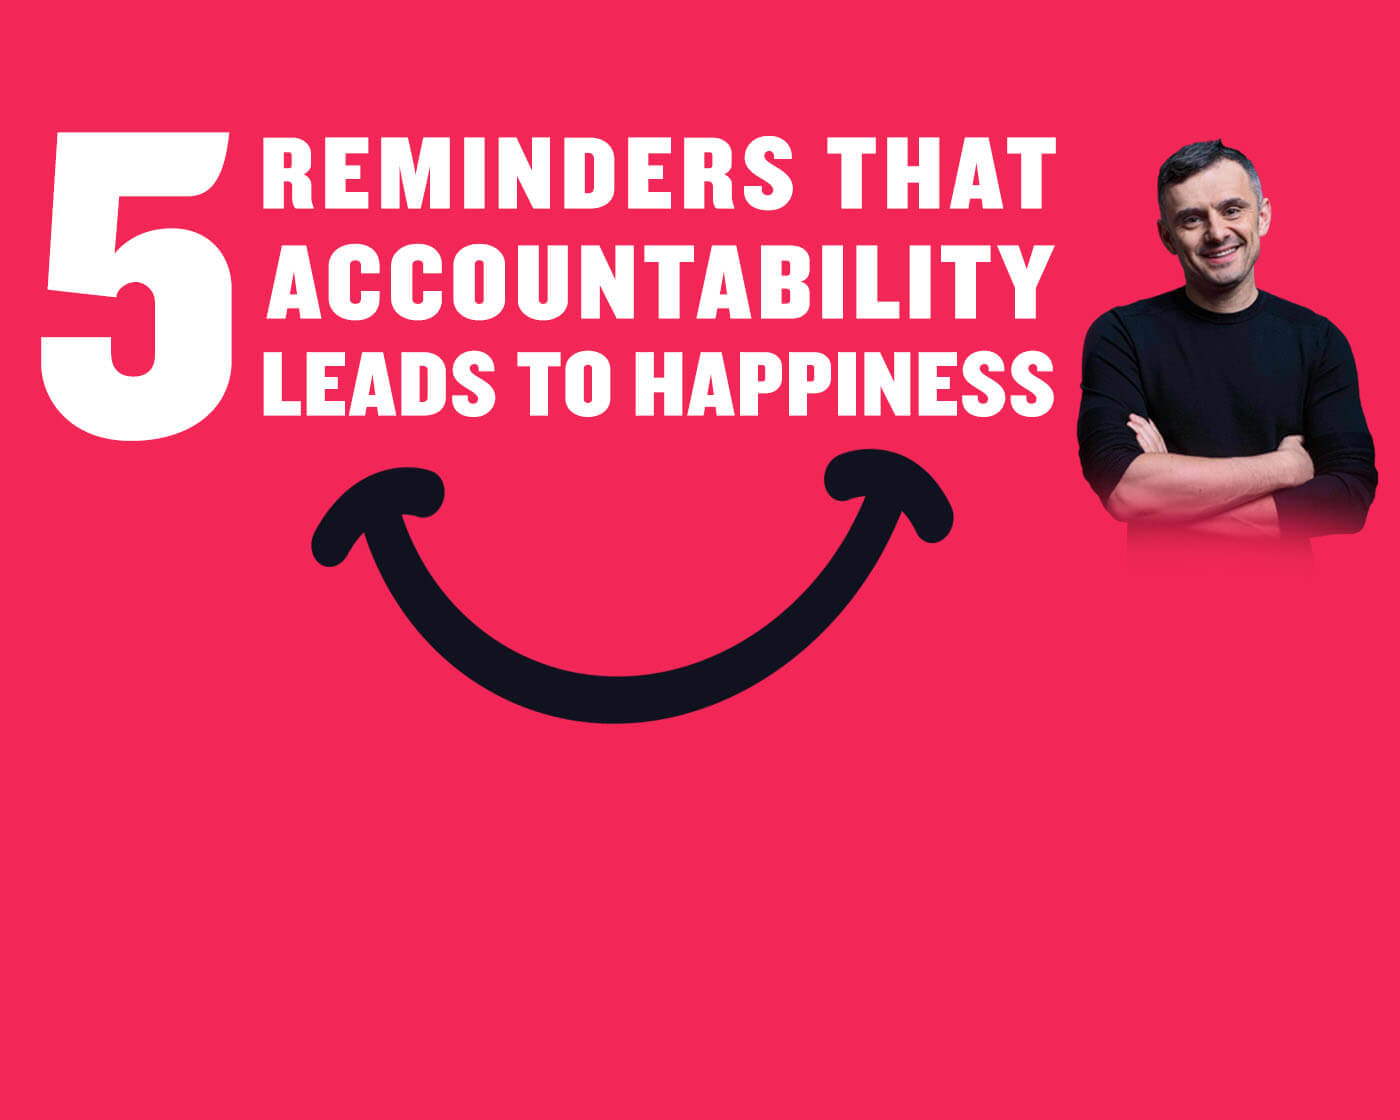 5 Reminders That Accountability Leads to Happiness